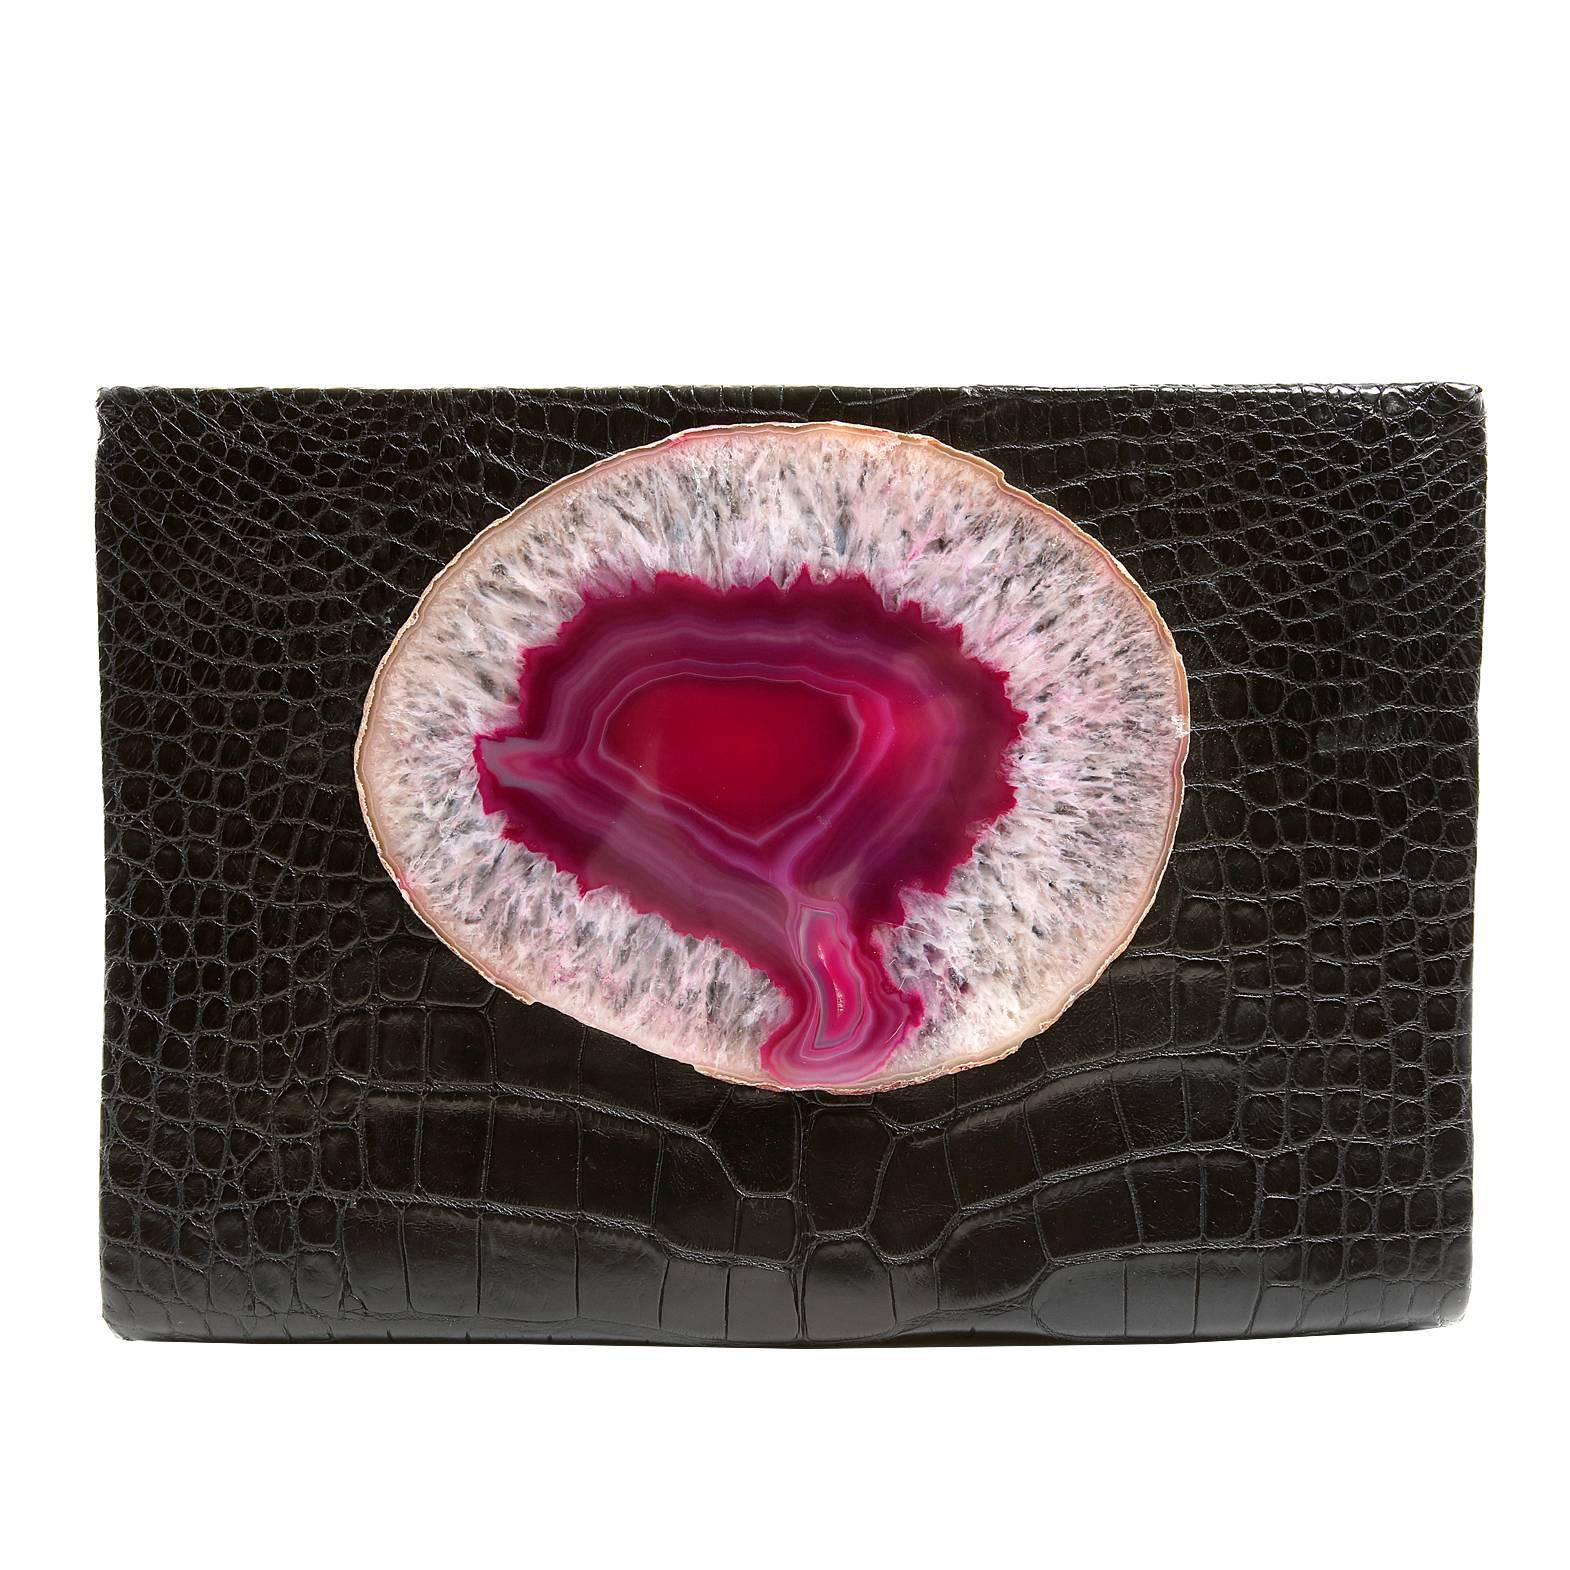 Paige Gamble Clack Alligator with Agate Clutch For Sale